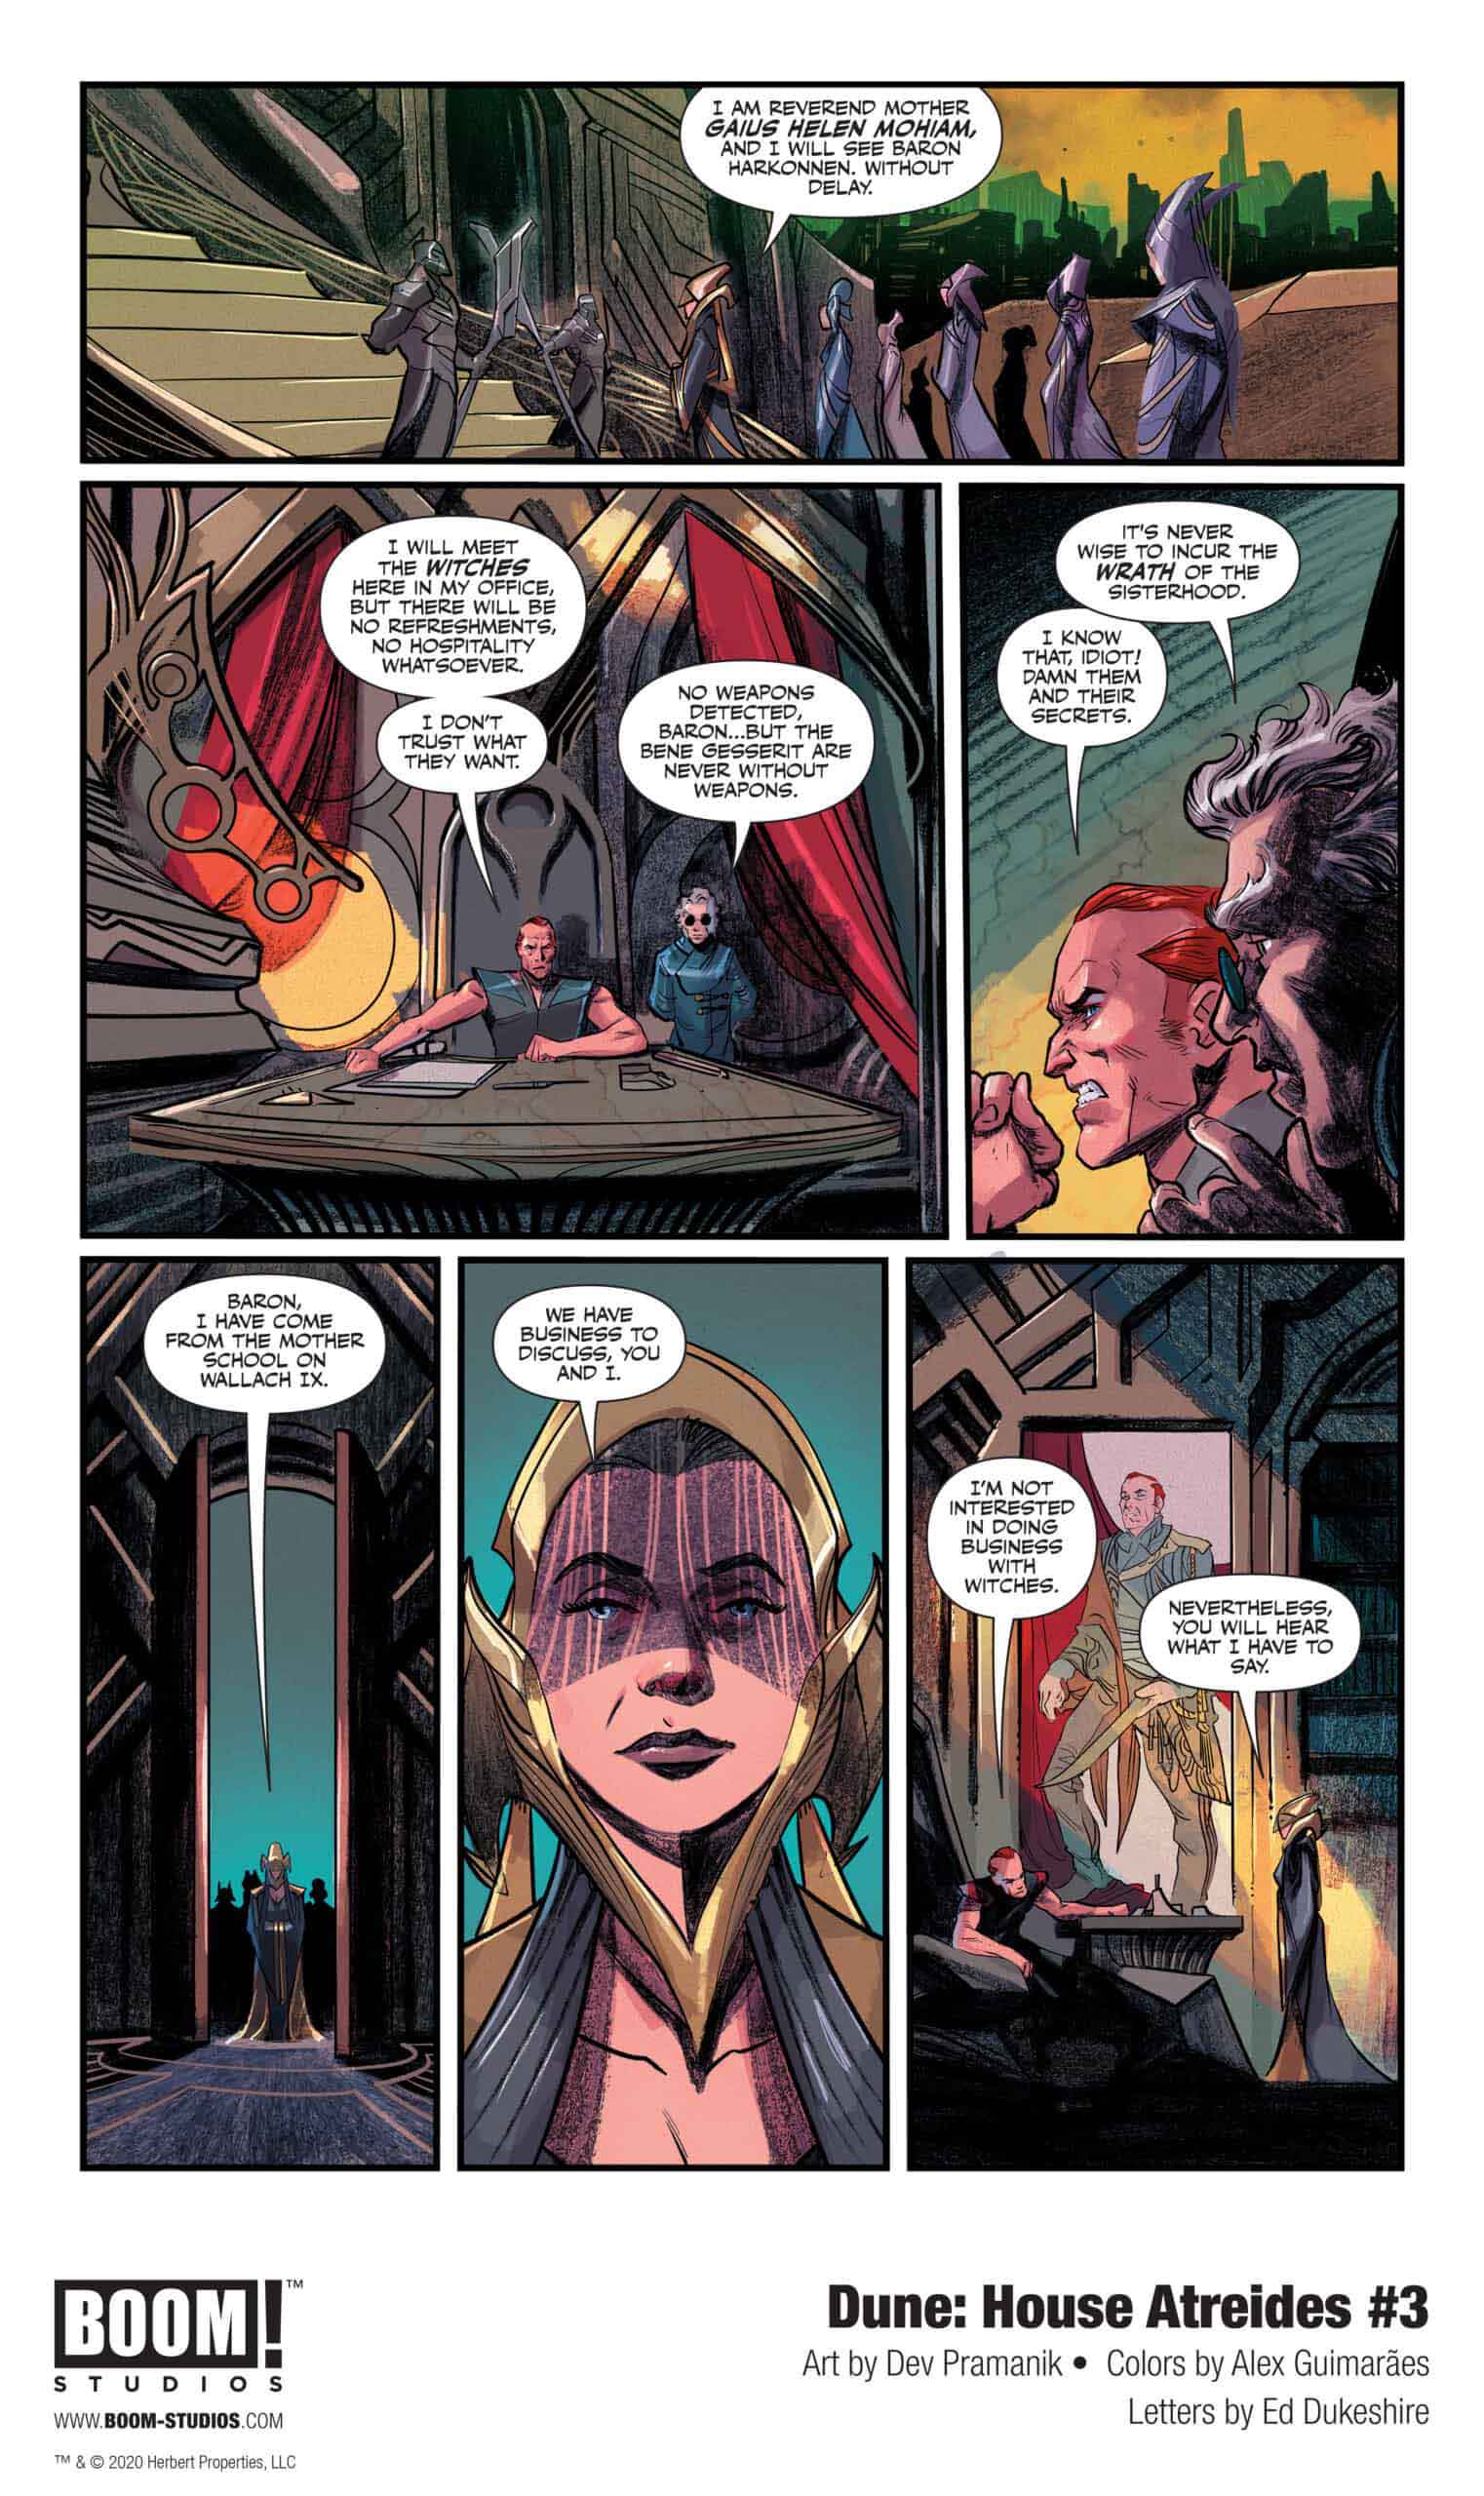 Dune: House Atreides comic series. Issue #3, preview page 2.